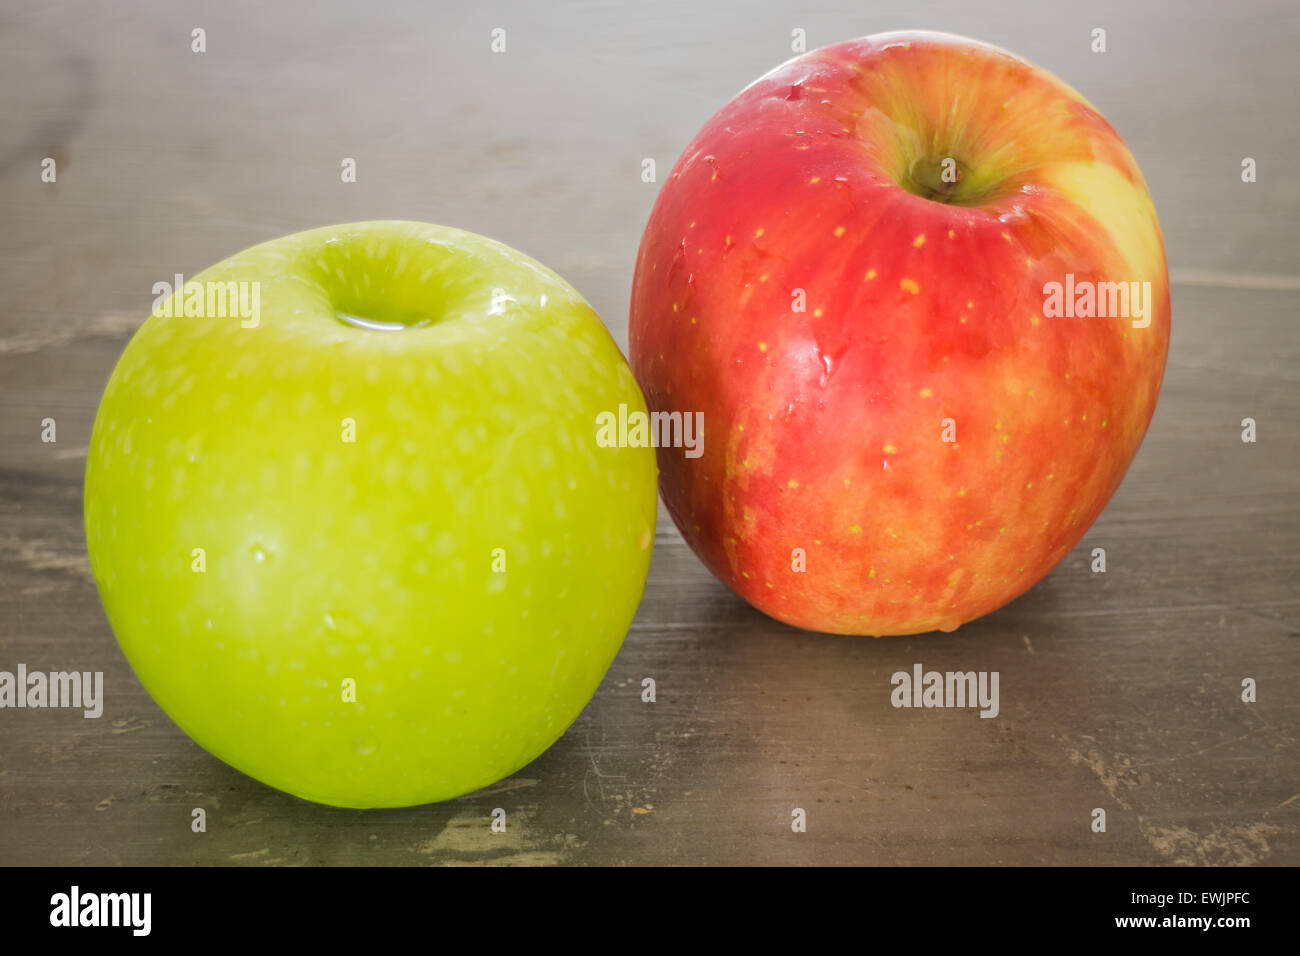 Green and red apple on the table, stock photo Stock Photo